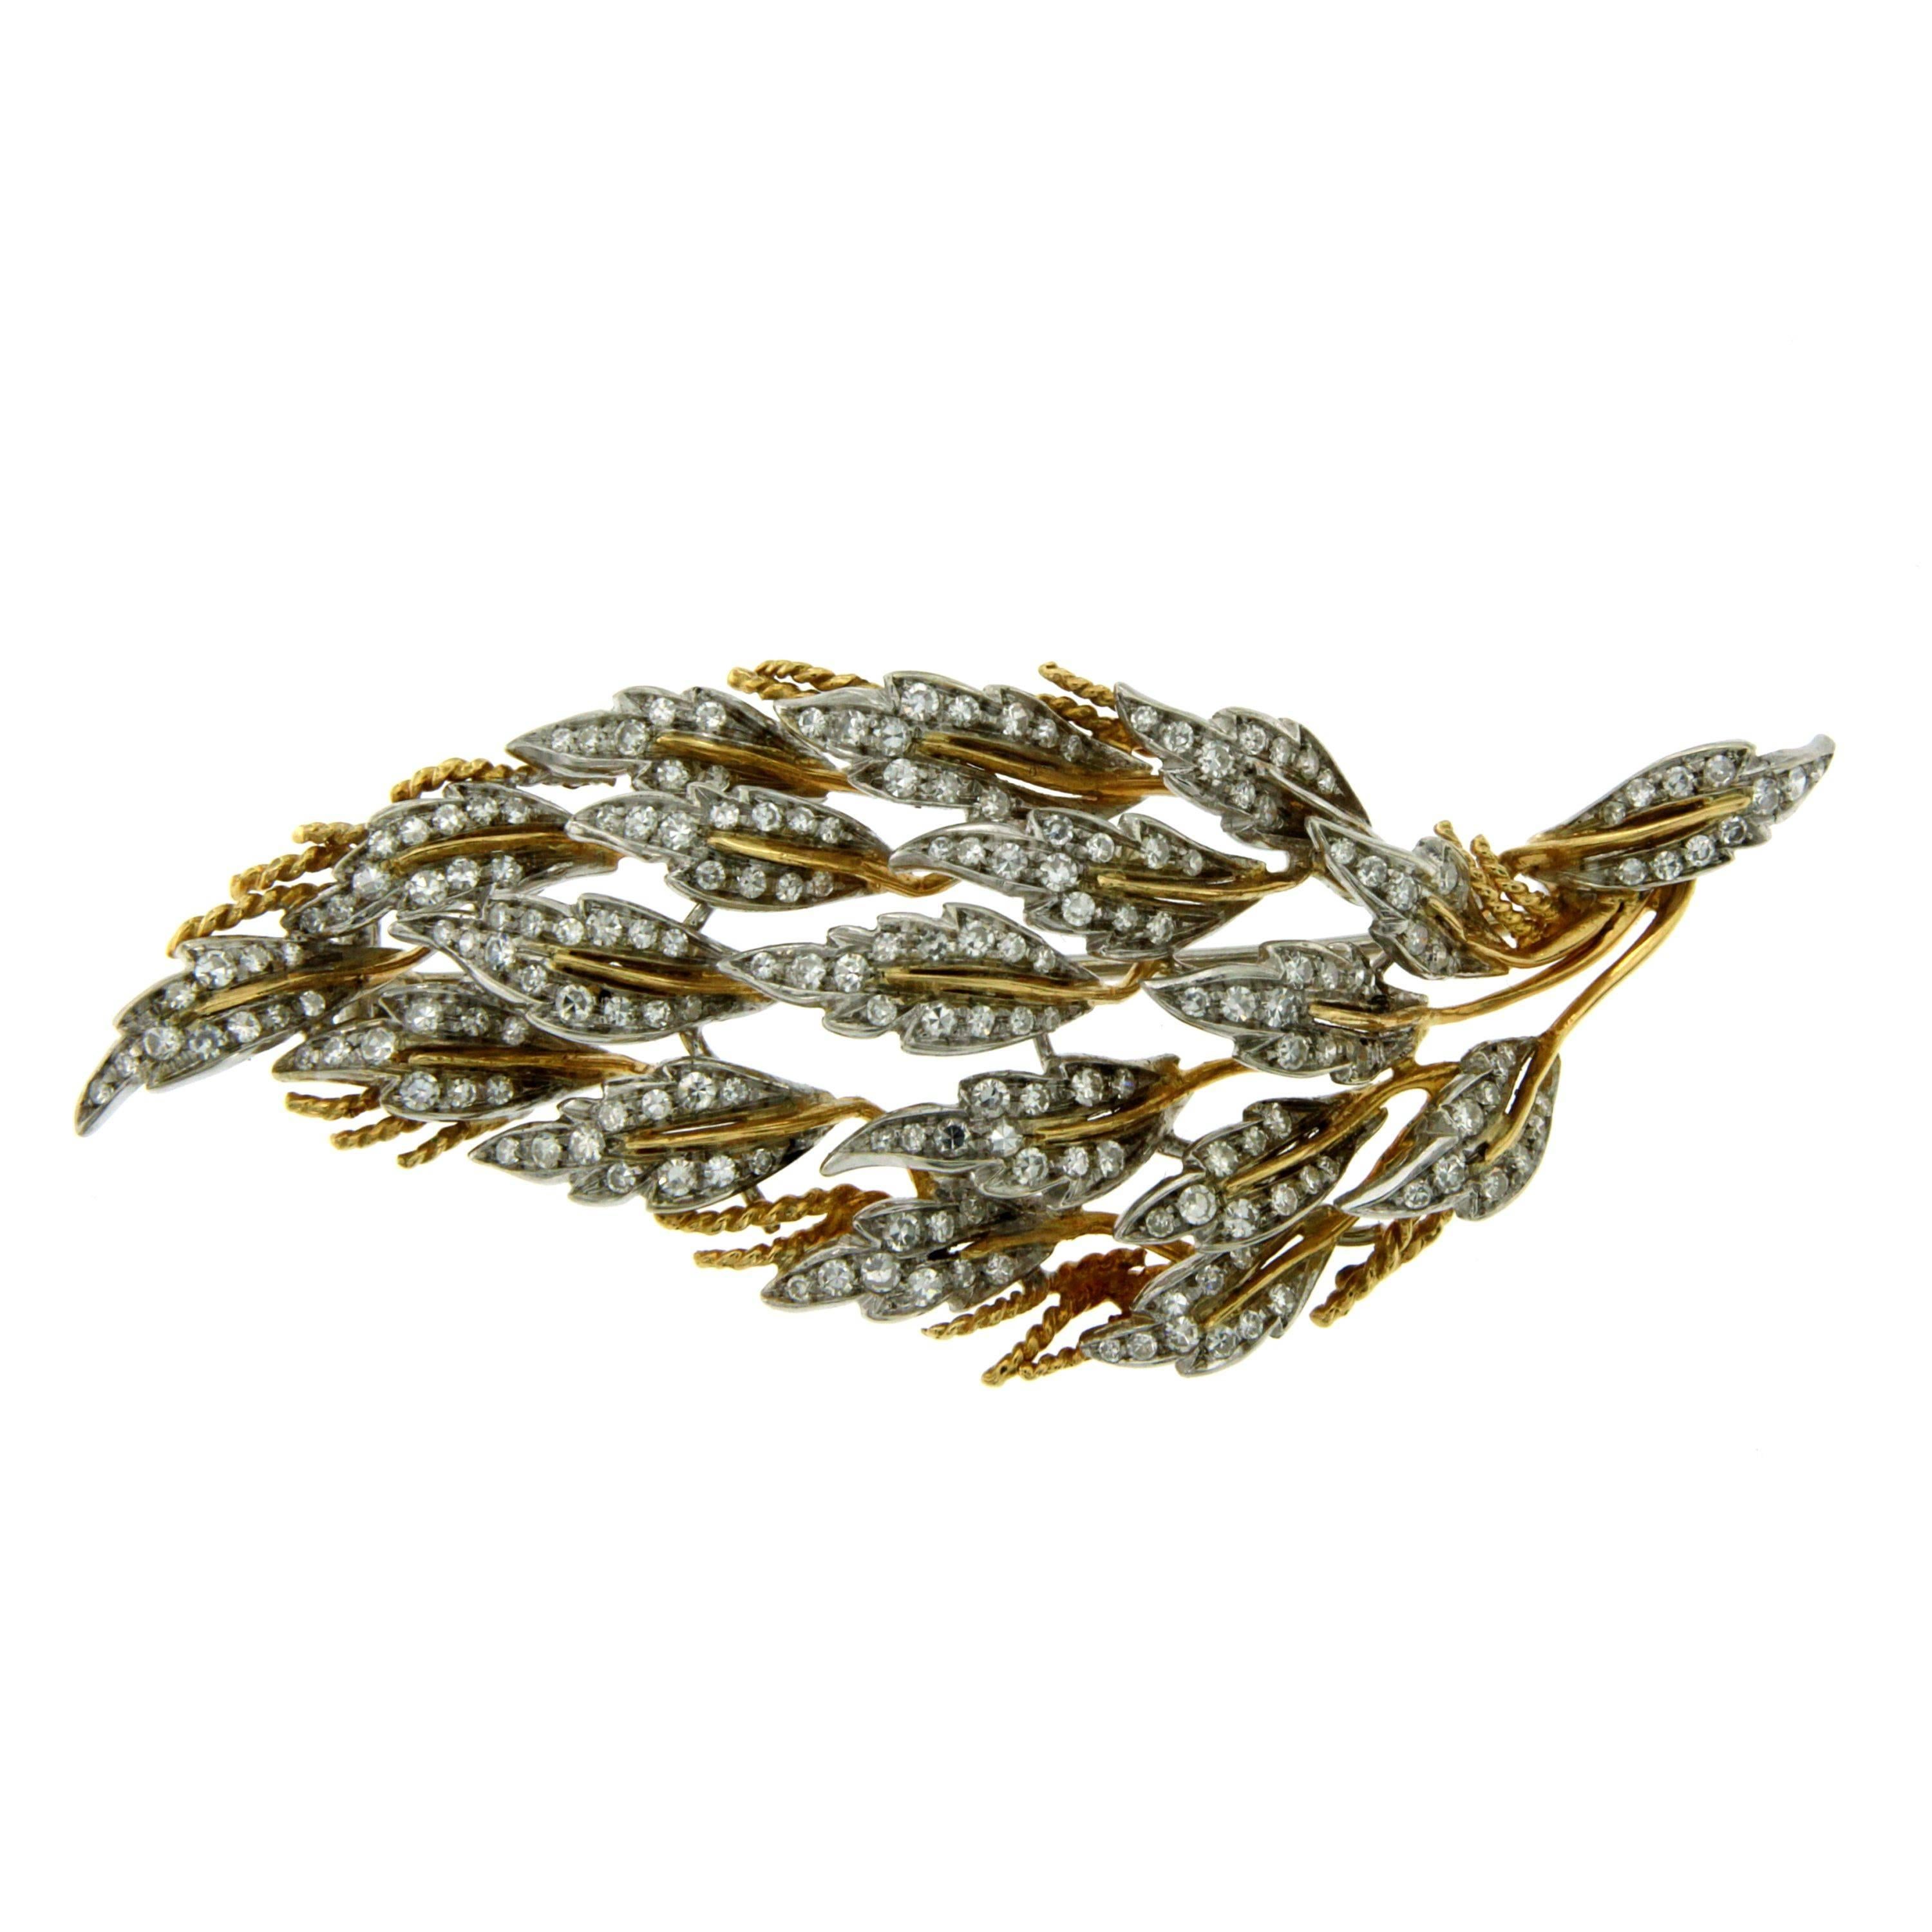 Elegant white and yellow 18k Gold brooch/pendant, hand made in Italy hallmarked 160 Valenza, from 1970

It featuring a leaves motif and is set with 3 carat of sparkling round cut Diamonds, graded G color Vvs1.

CONDITION: Pre-owned - Excellent 